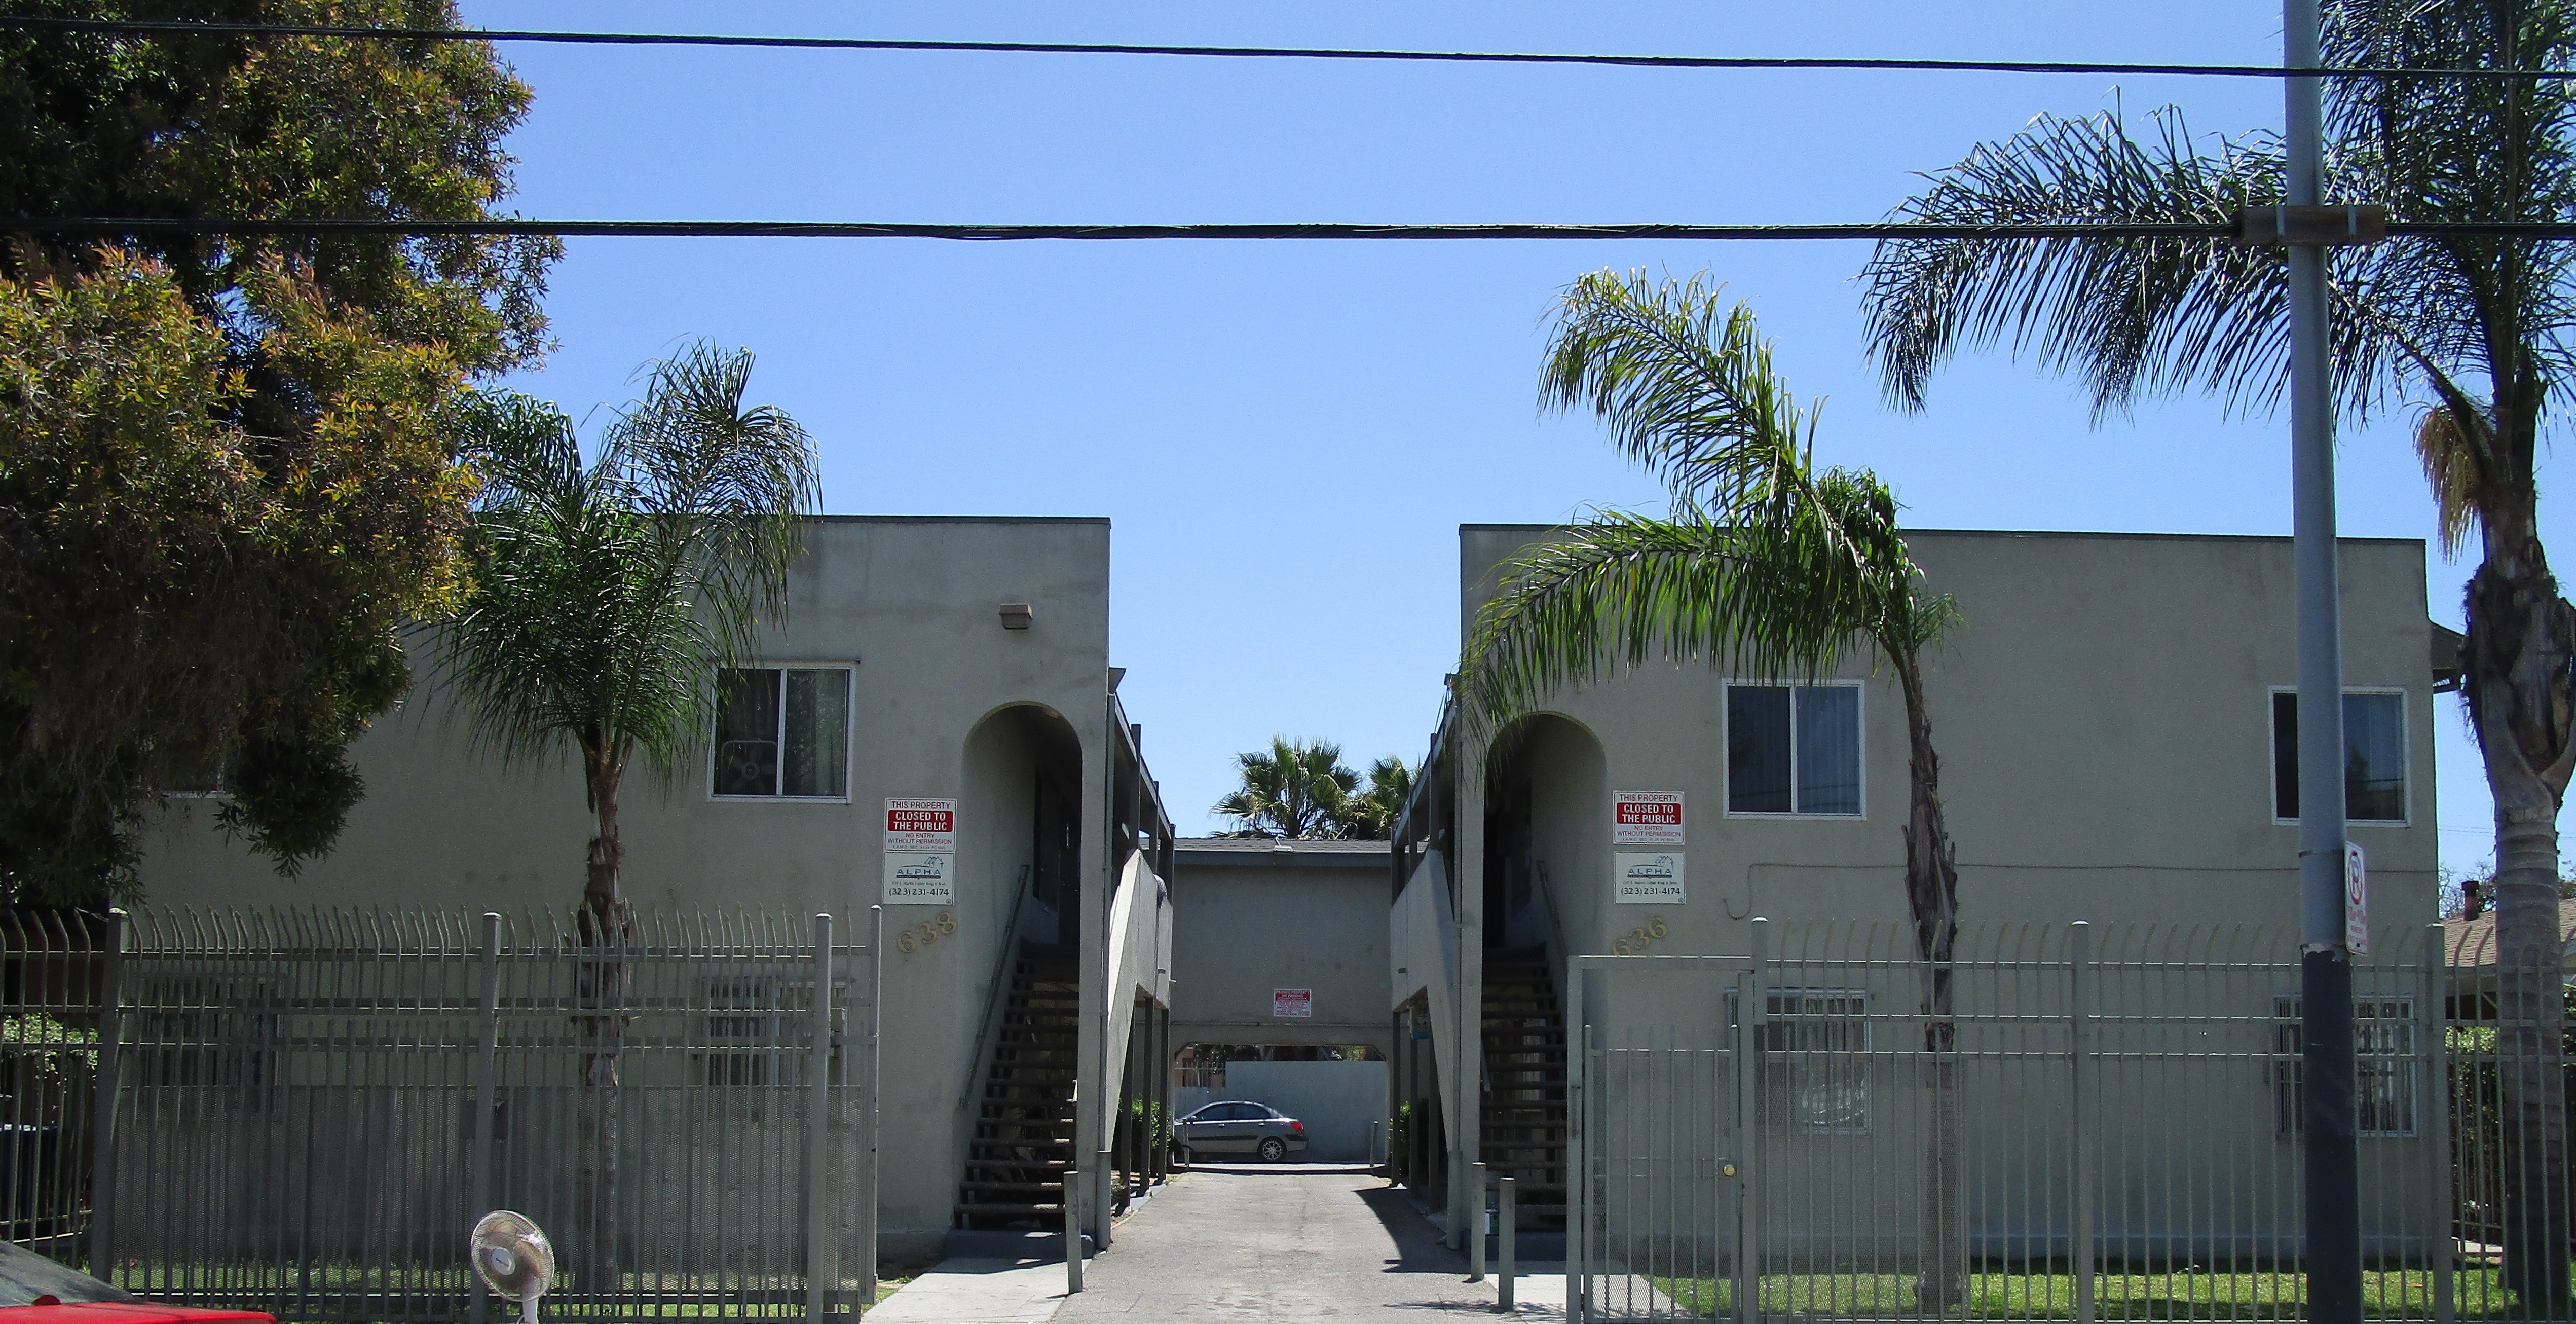 Front view of two apartment buildings next to each other, four windows on each building, two story, stairs up on both buildings, open gate, grass in front of the units, multiple trees, far back a parked car in the parking lot, no public parking and manage